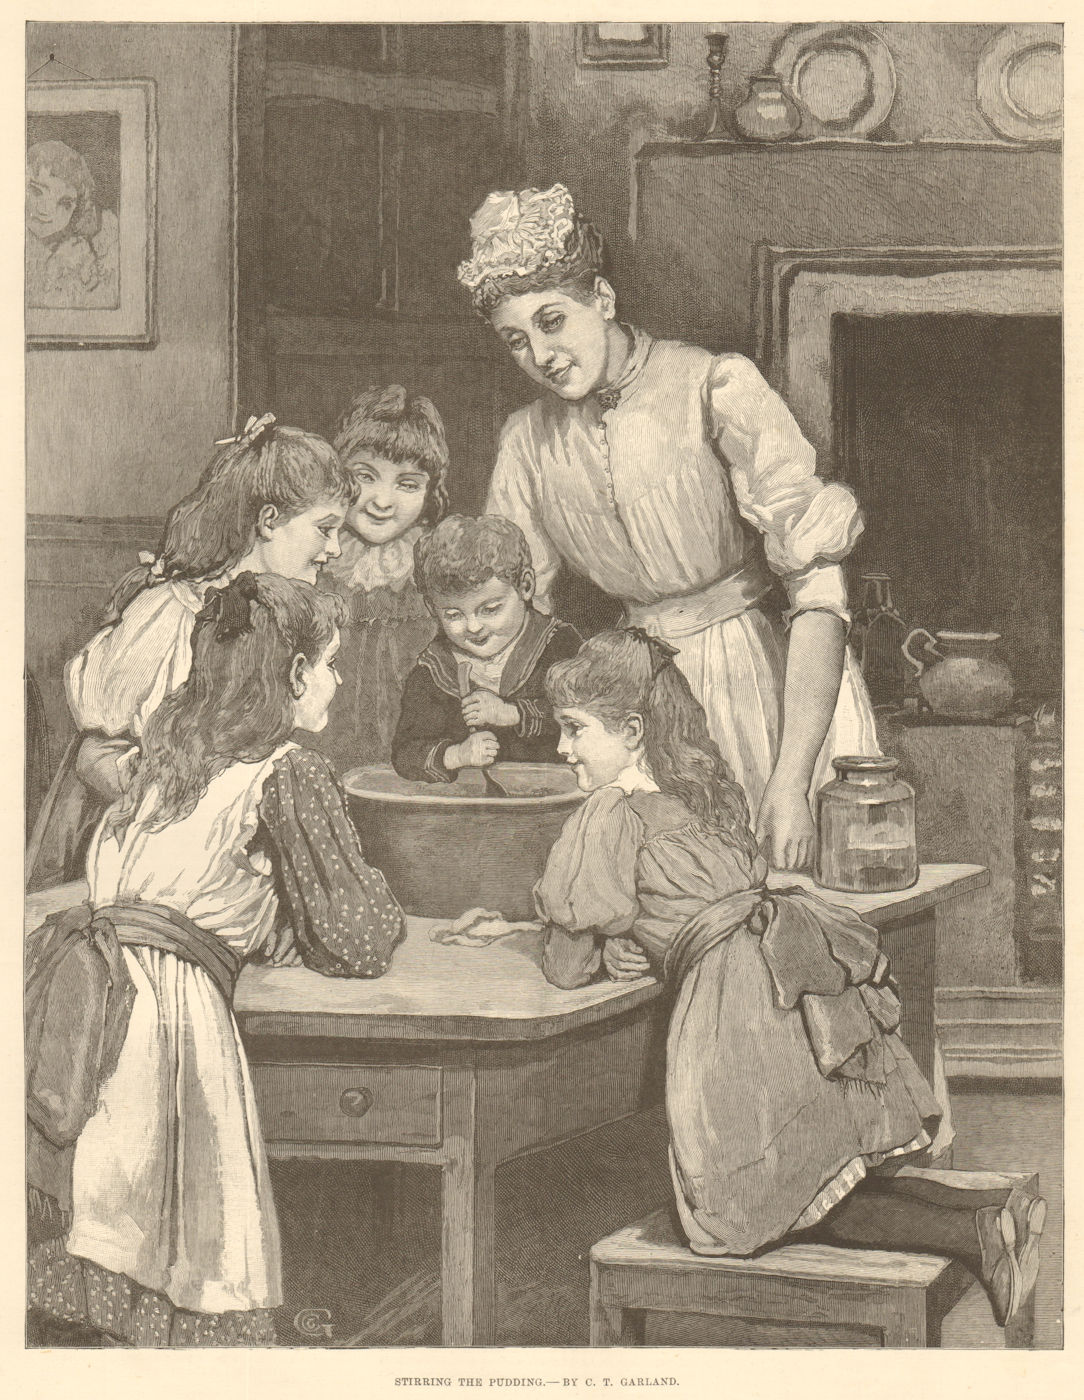 Associate Product Stirring the pudding, by C. T. Garland. Family. Hospitality 1892 old print